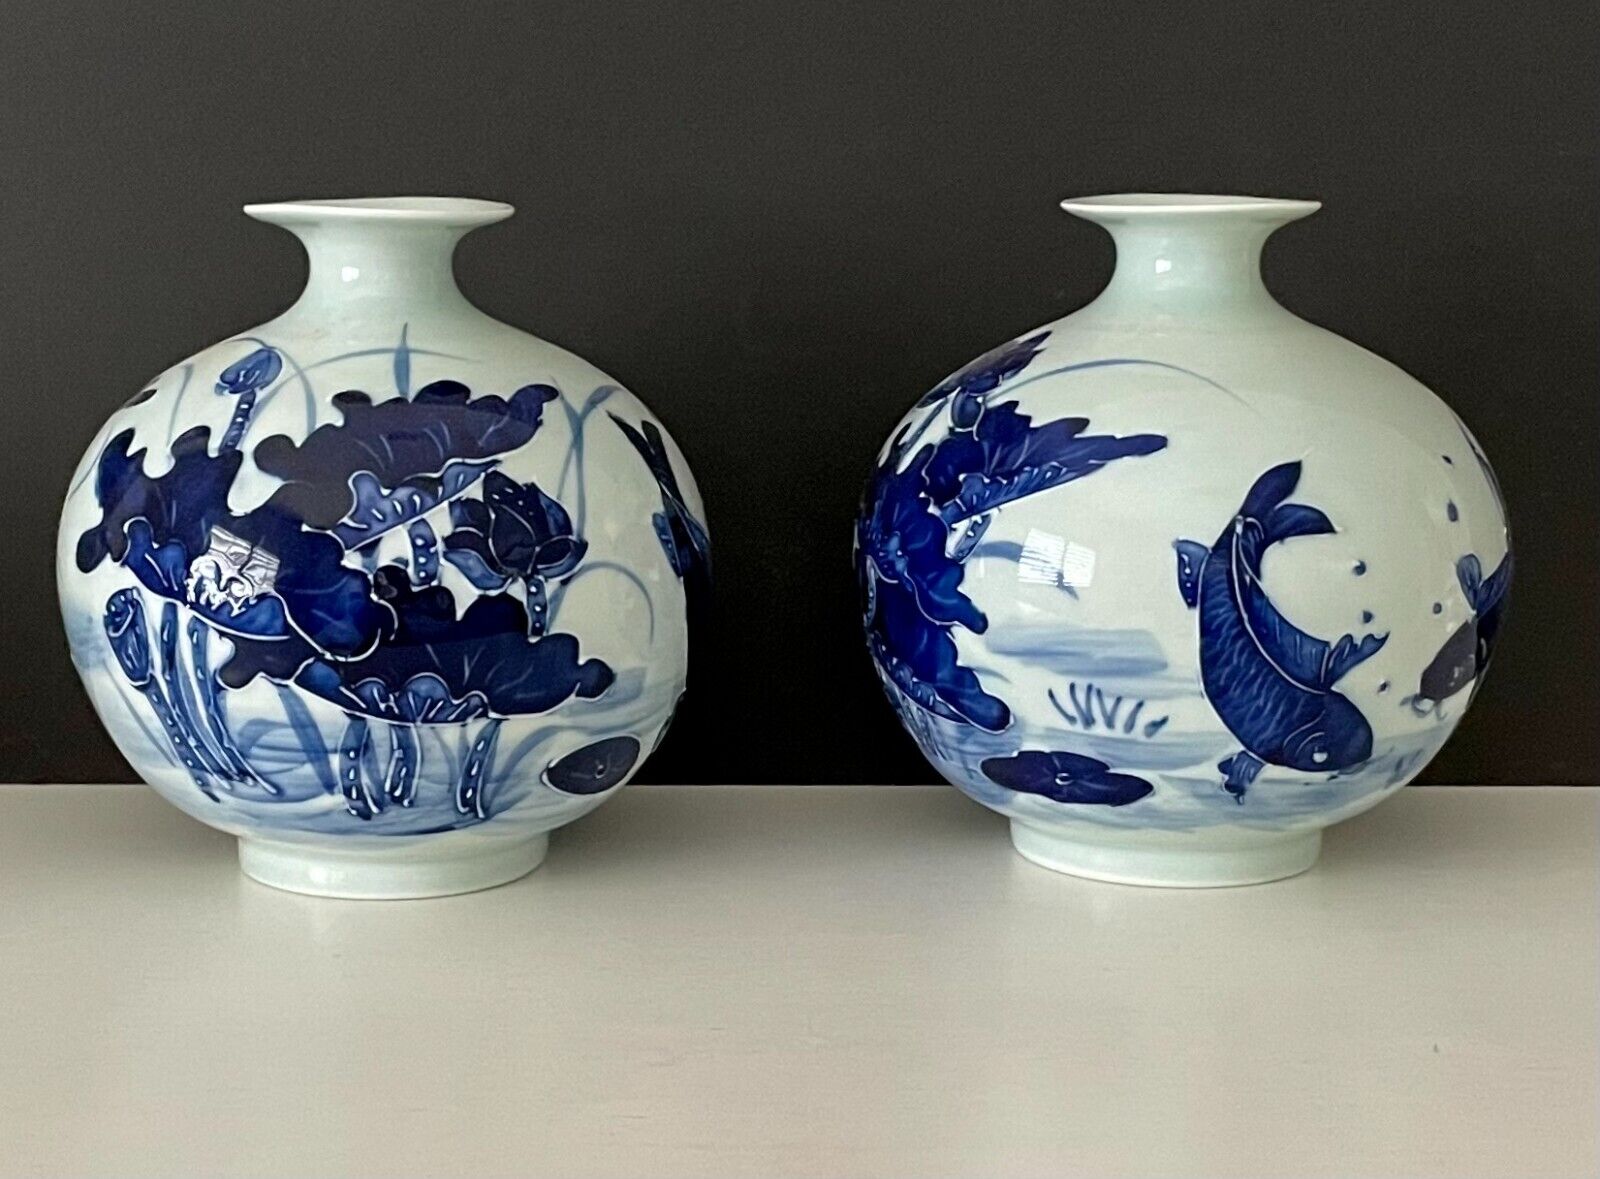 A Pair of Chinese Porcelain Vases Blue and White Lotus Koi Fish Signed